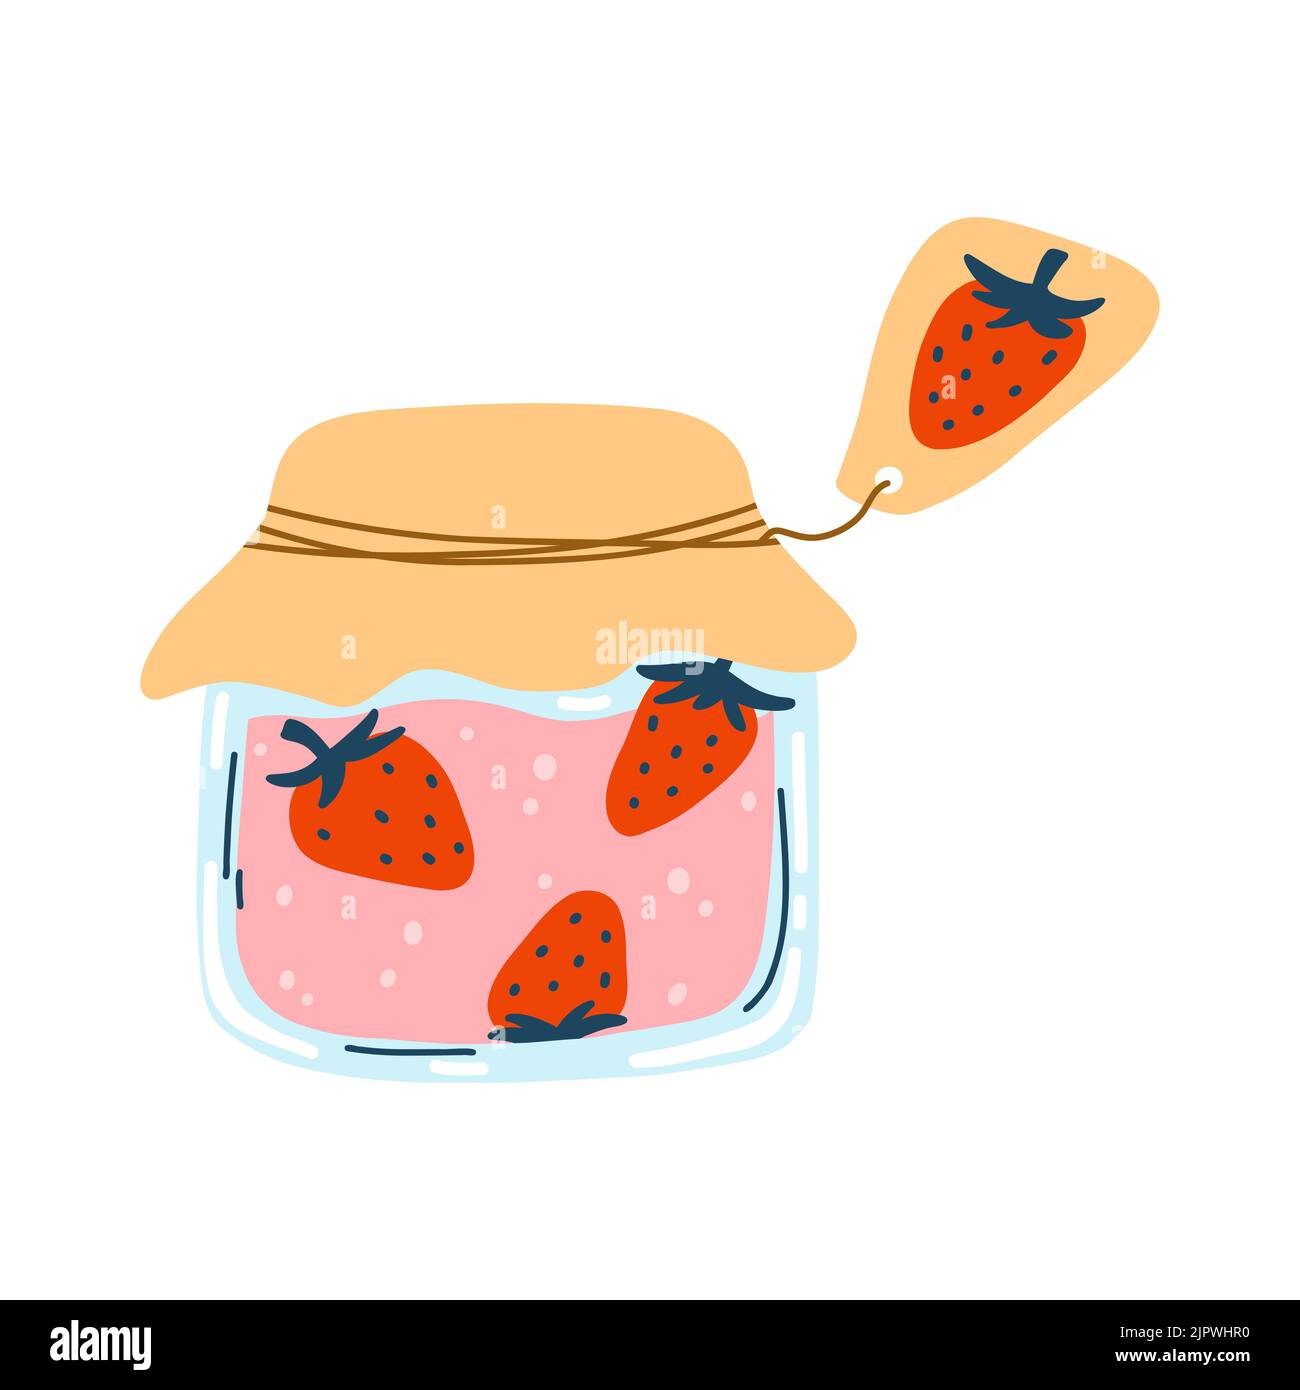 https://c8.alamy.com/comp/2JPWHR0/home-made-strawberry-jam-canned-fruit-in-cartoon-hand-drawn-flat-style-vector-illustration-of-glass-jar-with-preserved-food-compote-marmalade-2JPWHR0.jpg